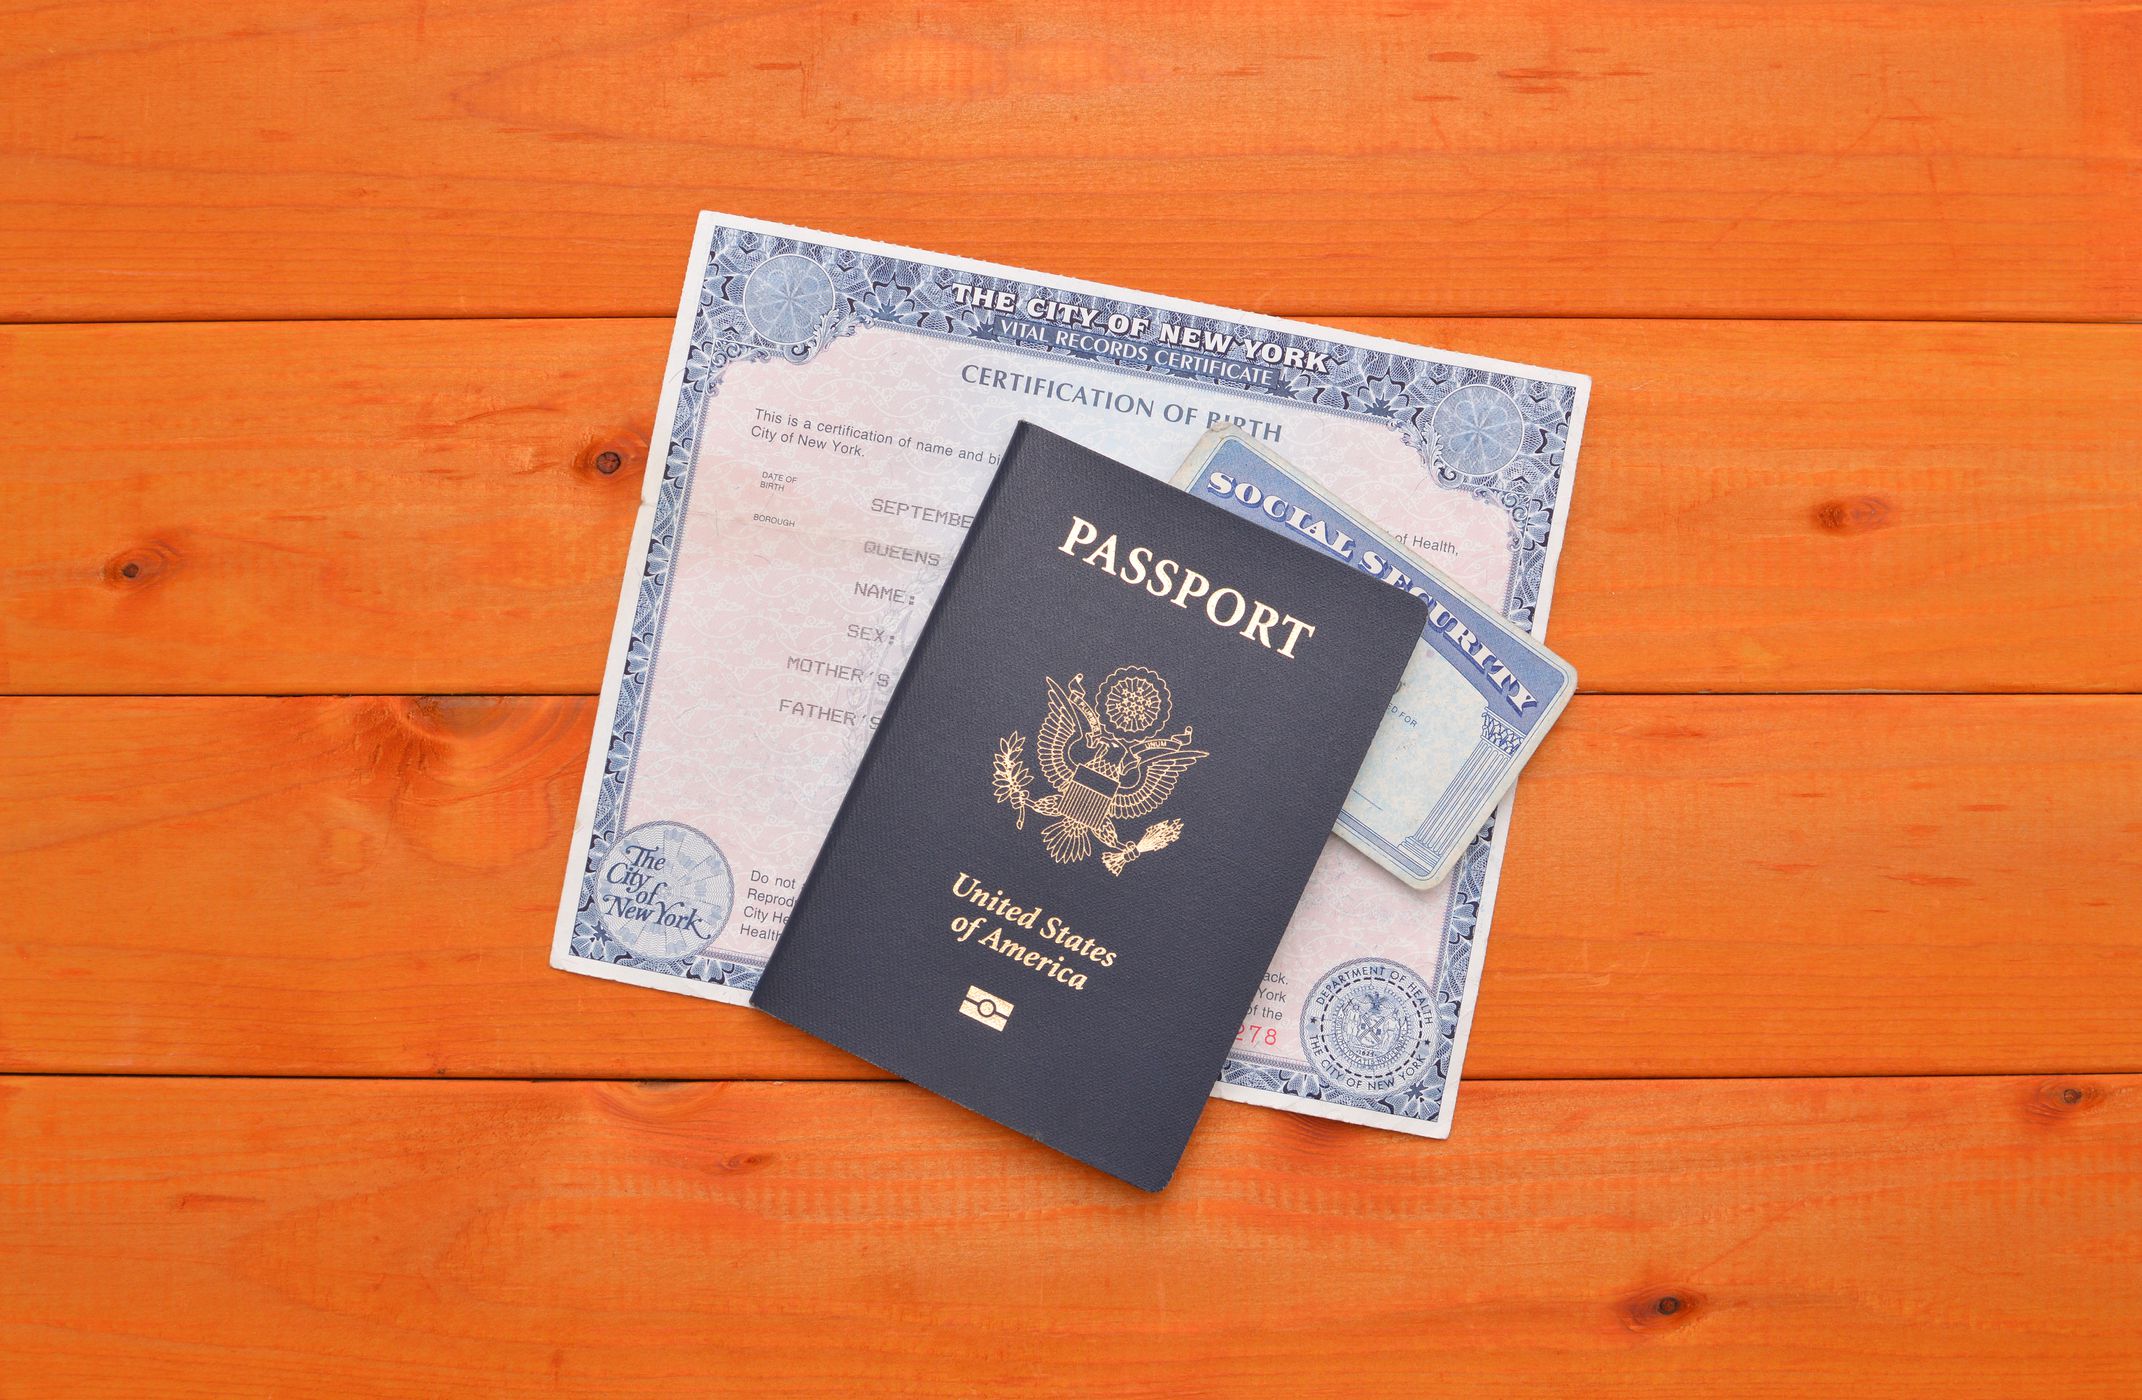 <p>Before you go anywhere, you’ll want to check a few important items off your to-do list.</p><h3>Collect Your Baby’s Travel Documents</h3><p>When you’re traveling within the United States, your baby is good to go. Just be sure to have their birth certificate on hand and, if only one parent is present, a letter of consent from the other, to avoid any custody dramas while you’re trying to enjoy a vacation.</p><p>If you’re traveling internationally, via plane, your little one will need a passport just like every other U.S. citizen. When traveling by sea, you’ll want to bring the birth certificate and consent letter from a parent who stays at home.</p><p>To apply for your baby’s passport, be sure to start the process as early as possible by filling out form <a href="https://travel.state.gov/content/travel/en/passports/need-passport/under-16.html">DS-11 </a>, found on the State Department’s site. You’ll be asked for evidence of a birth certificate (and/or other options to prove citizenship, if they apply to you) and a properly formatted photo. This image will be used until your kid is 5 and needs an updated passport — a source of great amusement for them until then, guaranteed.</p>